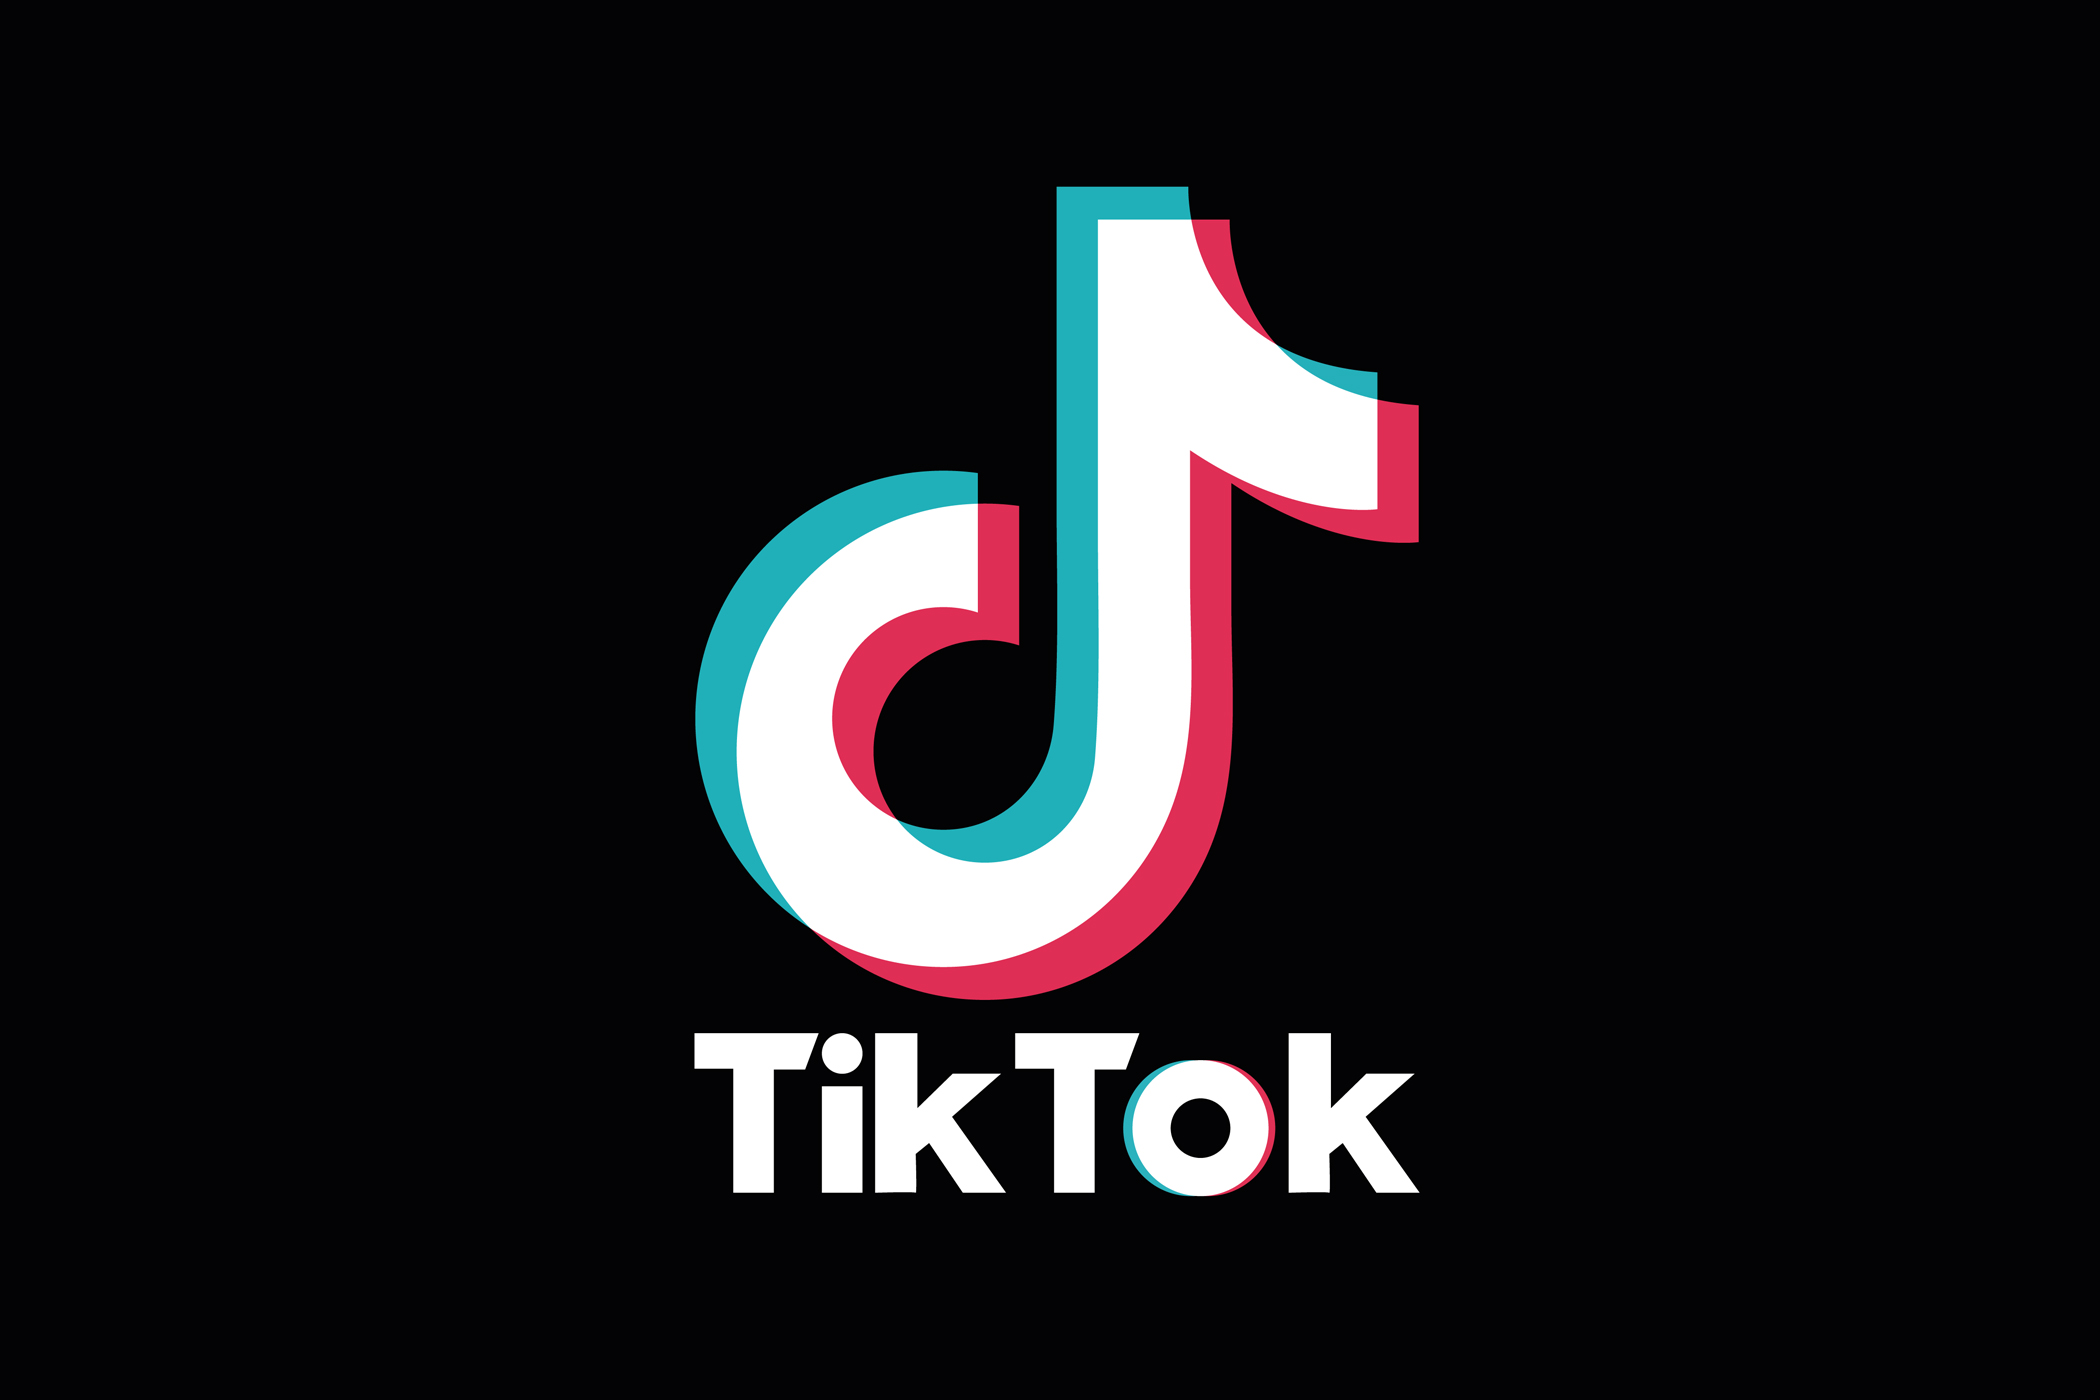 What Does "Pinned" Mean on TikTok?